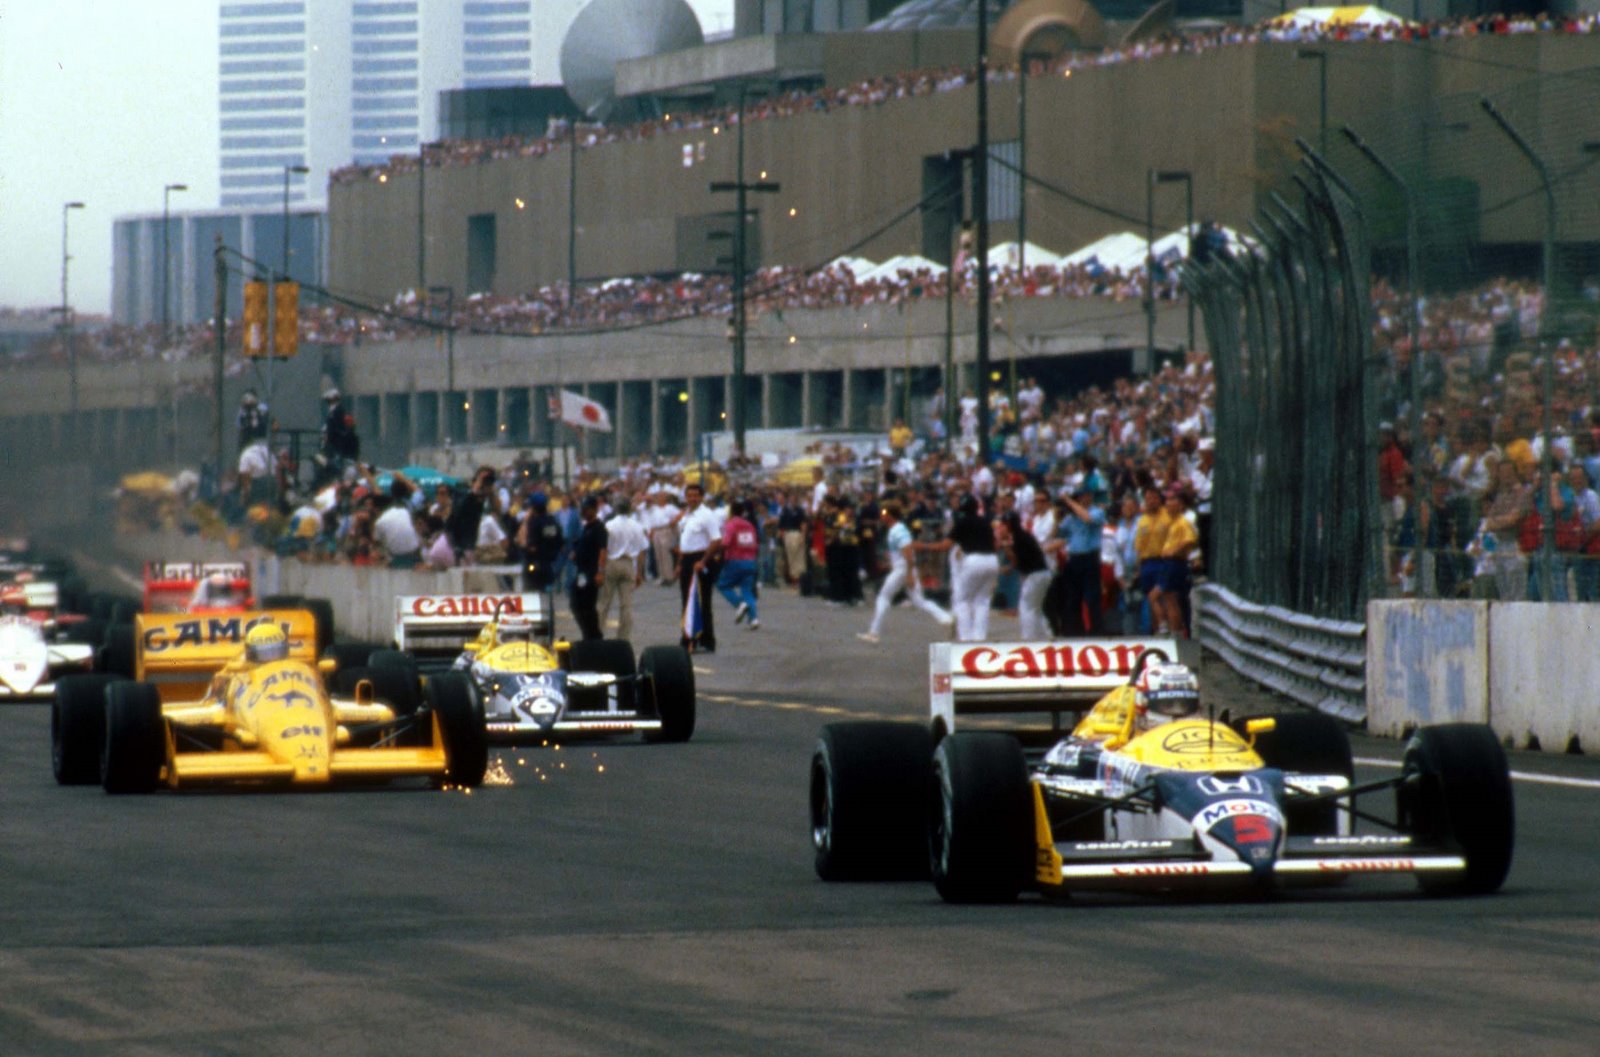 [Nigel+Mansell+and+in+the+back+Nelson+Piquet+Williams+F1+4.jpg]